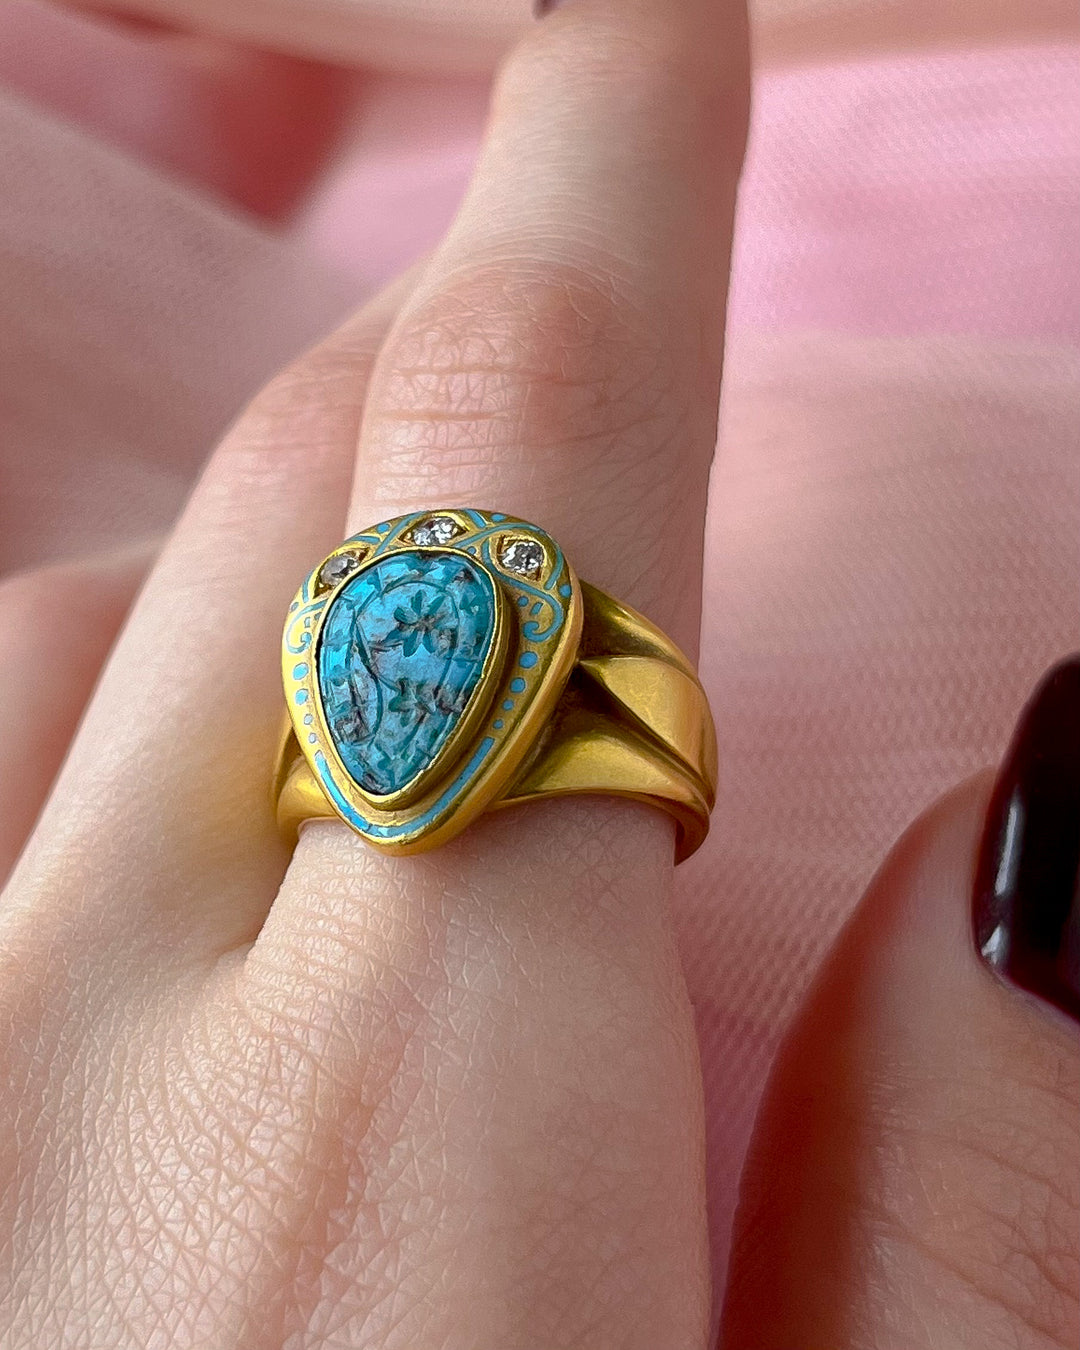 Stunning French Egyptian Revival Art Nouveau Turquoise Signet Ring